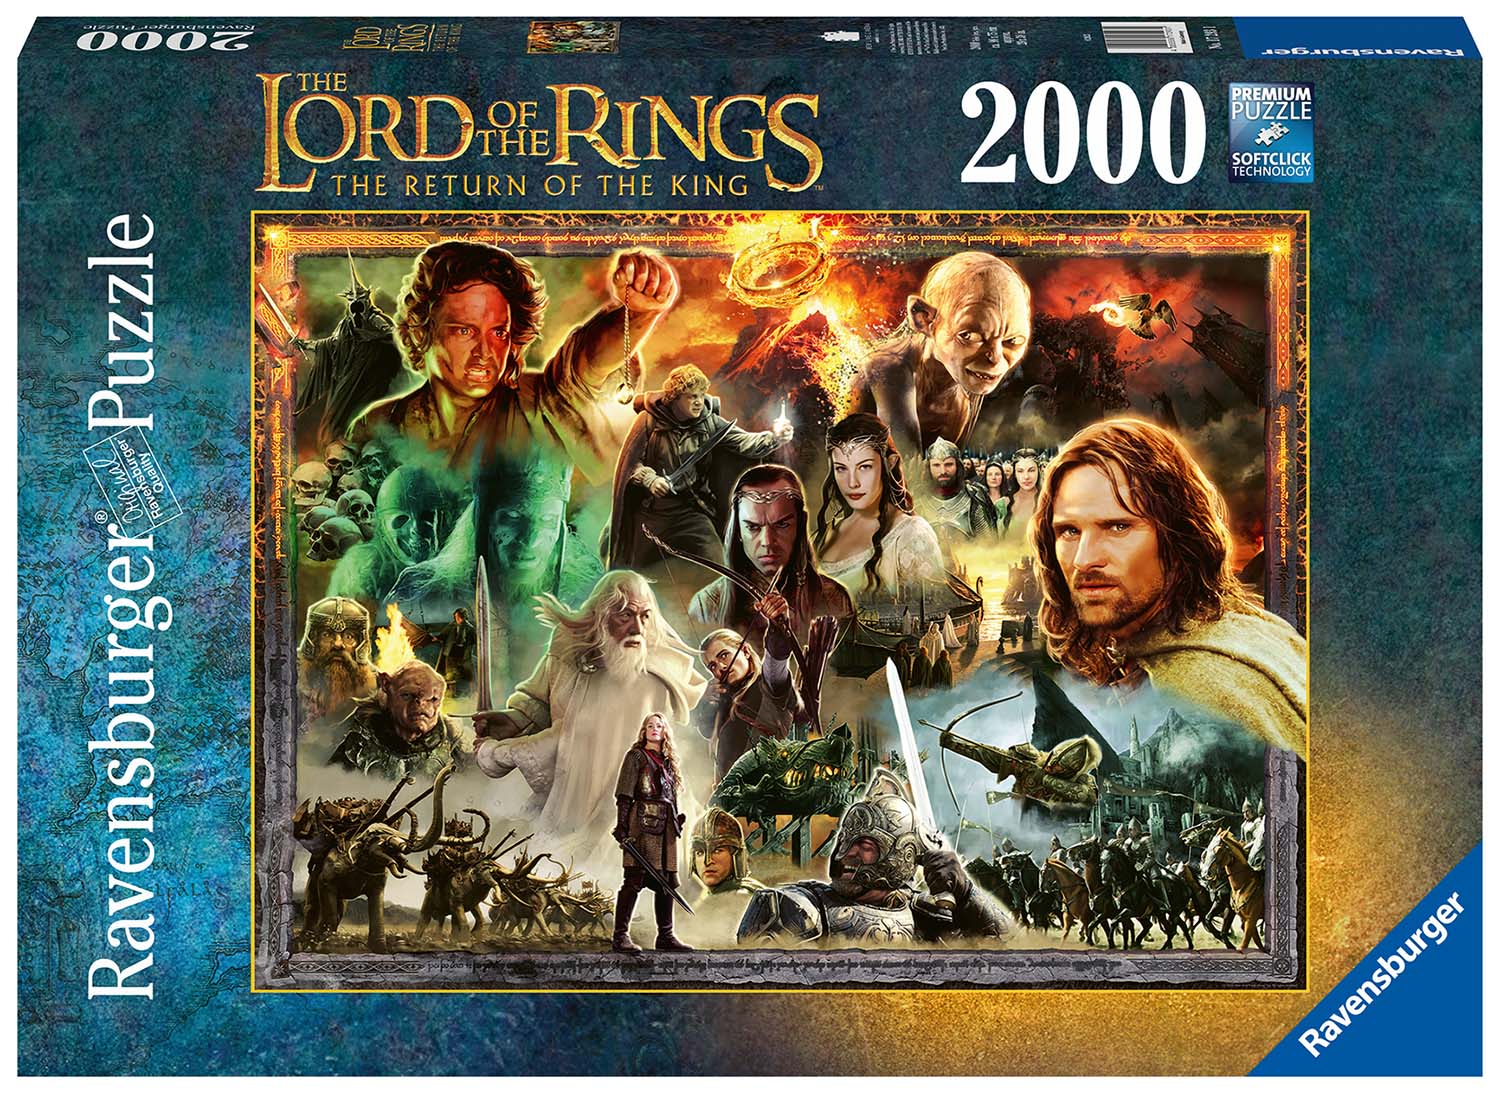 The Lord Of The Rings: The Return of the King Fantasy Jigsaw Puzzle